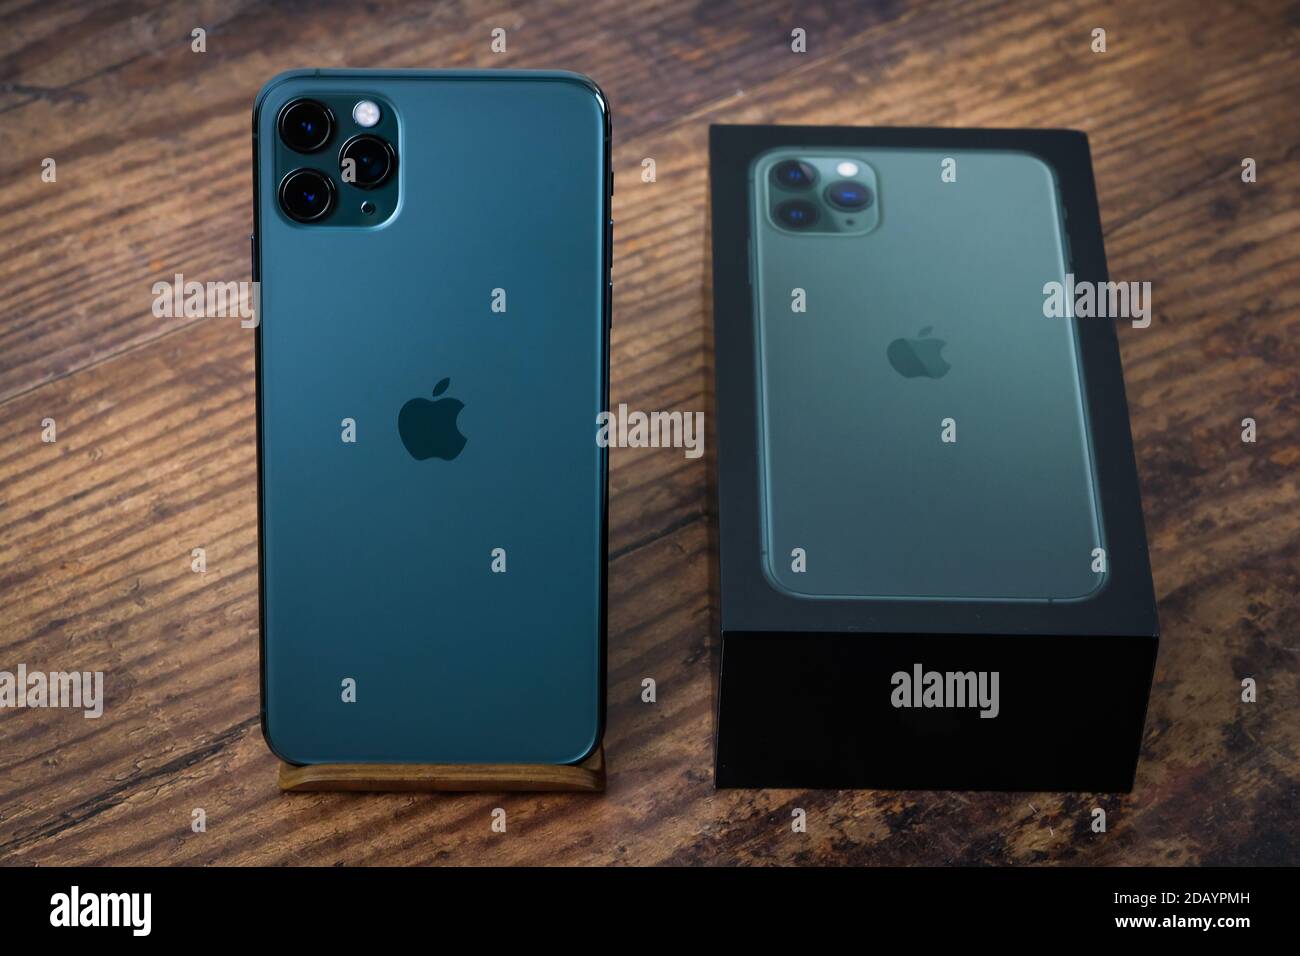 Iphone 11 Pro Max In Midnight Green Color Next To Its Box Stock Photo Alamy